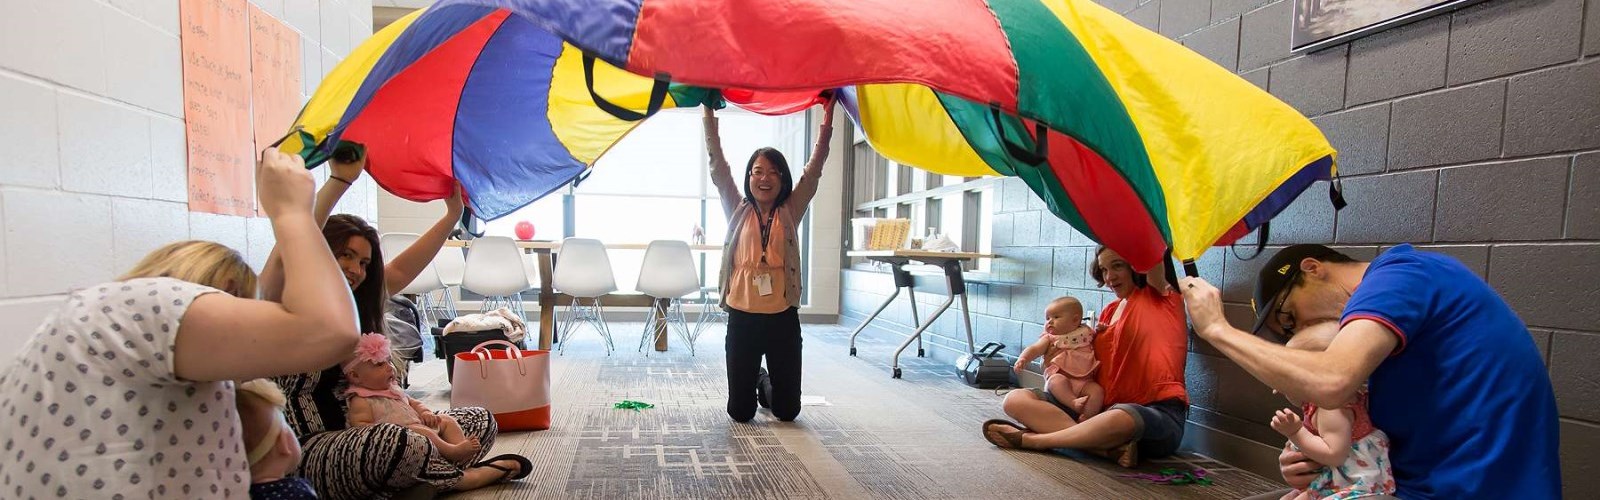 Parents and children playing with a coloured parachute